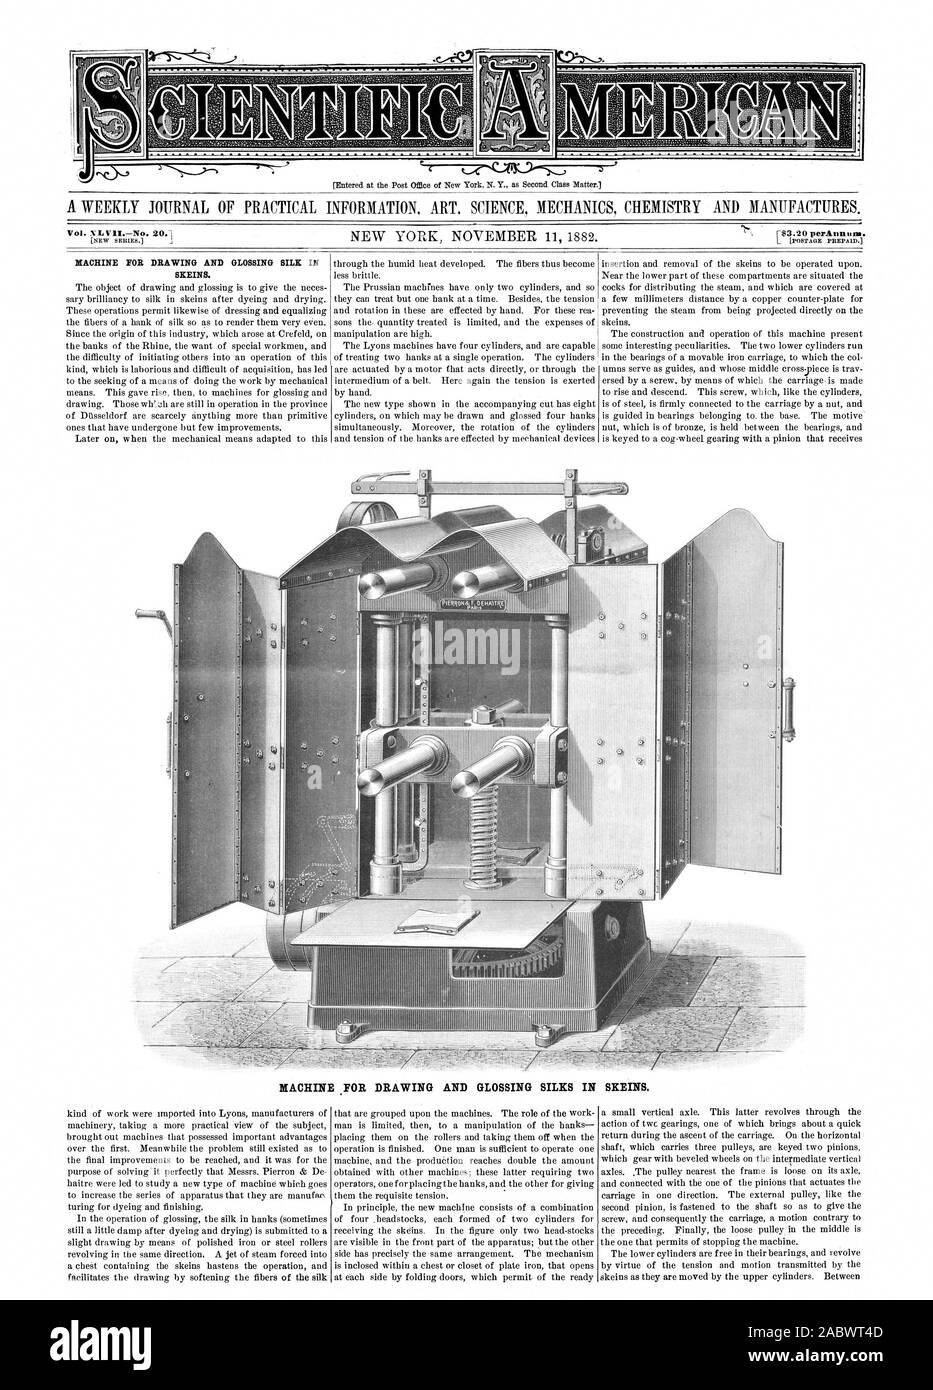 Entered at the Post Office of New York N.Y. as Second Class Matter. Vol. XL V1INo. 20.1 $3.20 perAnnum. MACHINE FOR DRAWING AND GLOSSING SILK IN SKEINS., scientific american, 1882-11-11 Stock Photo